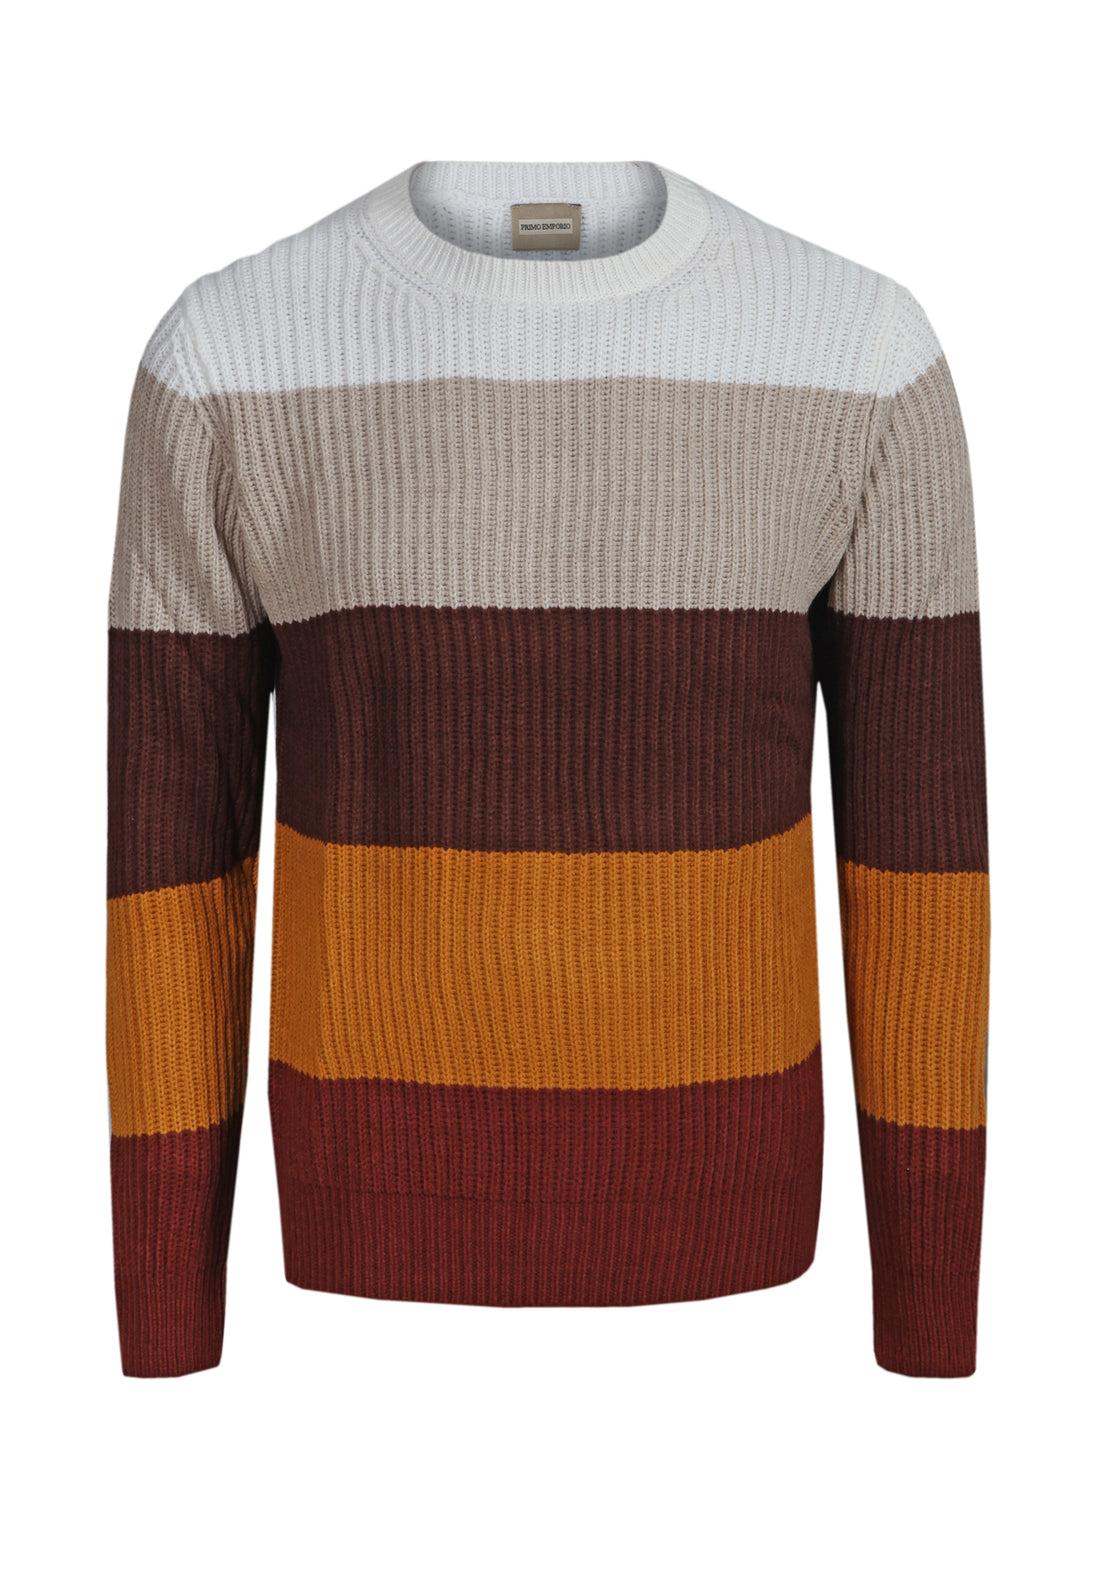 Wool sweater with horizontal bands - White